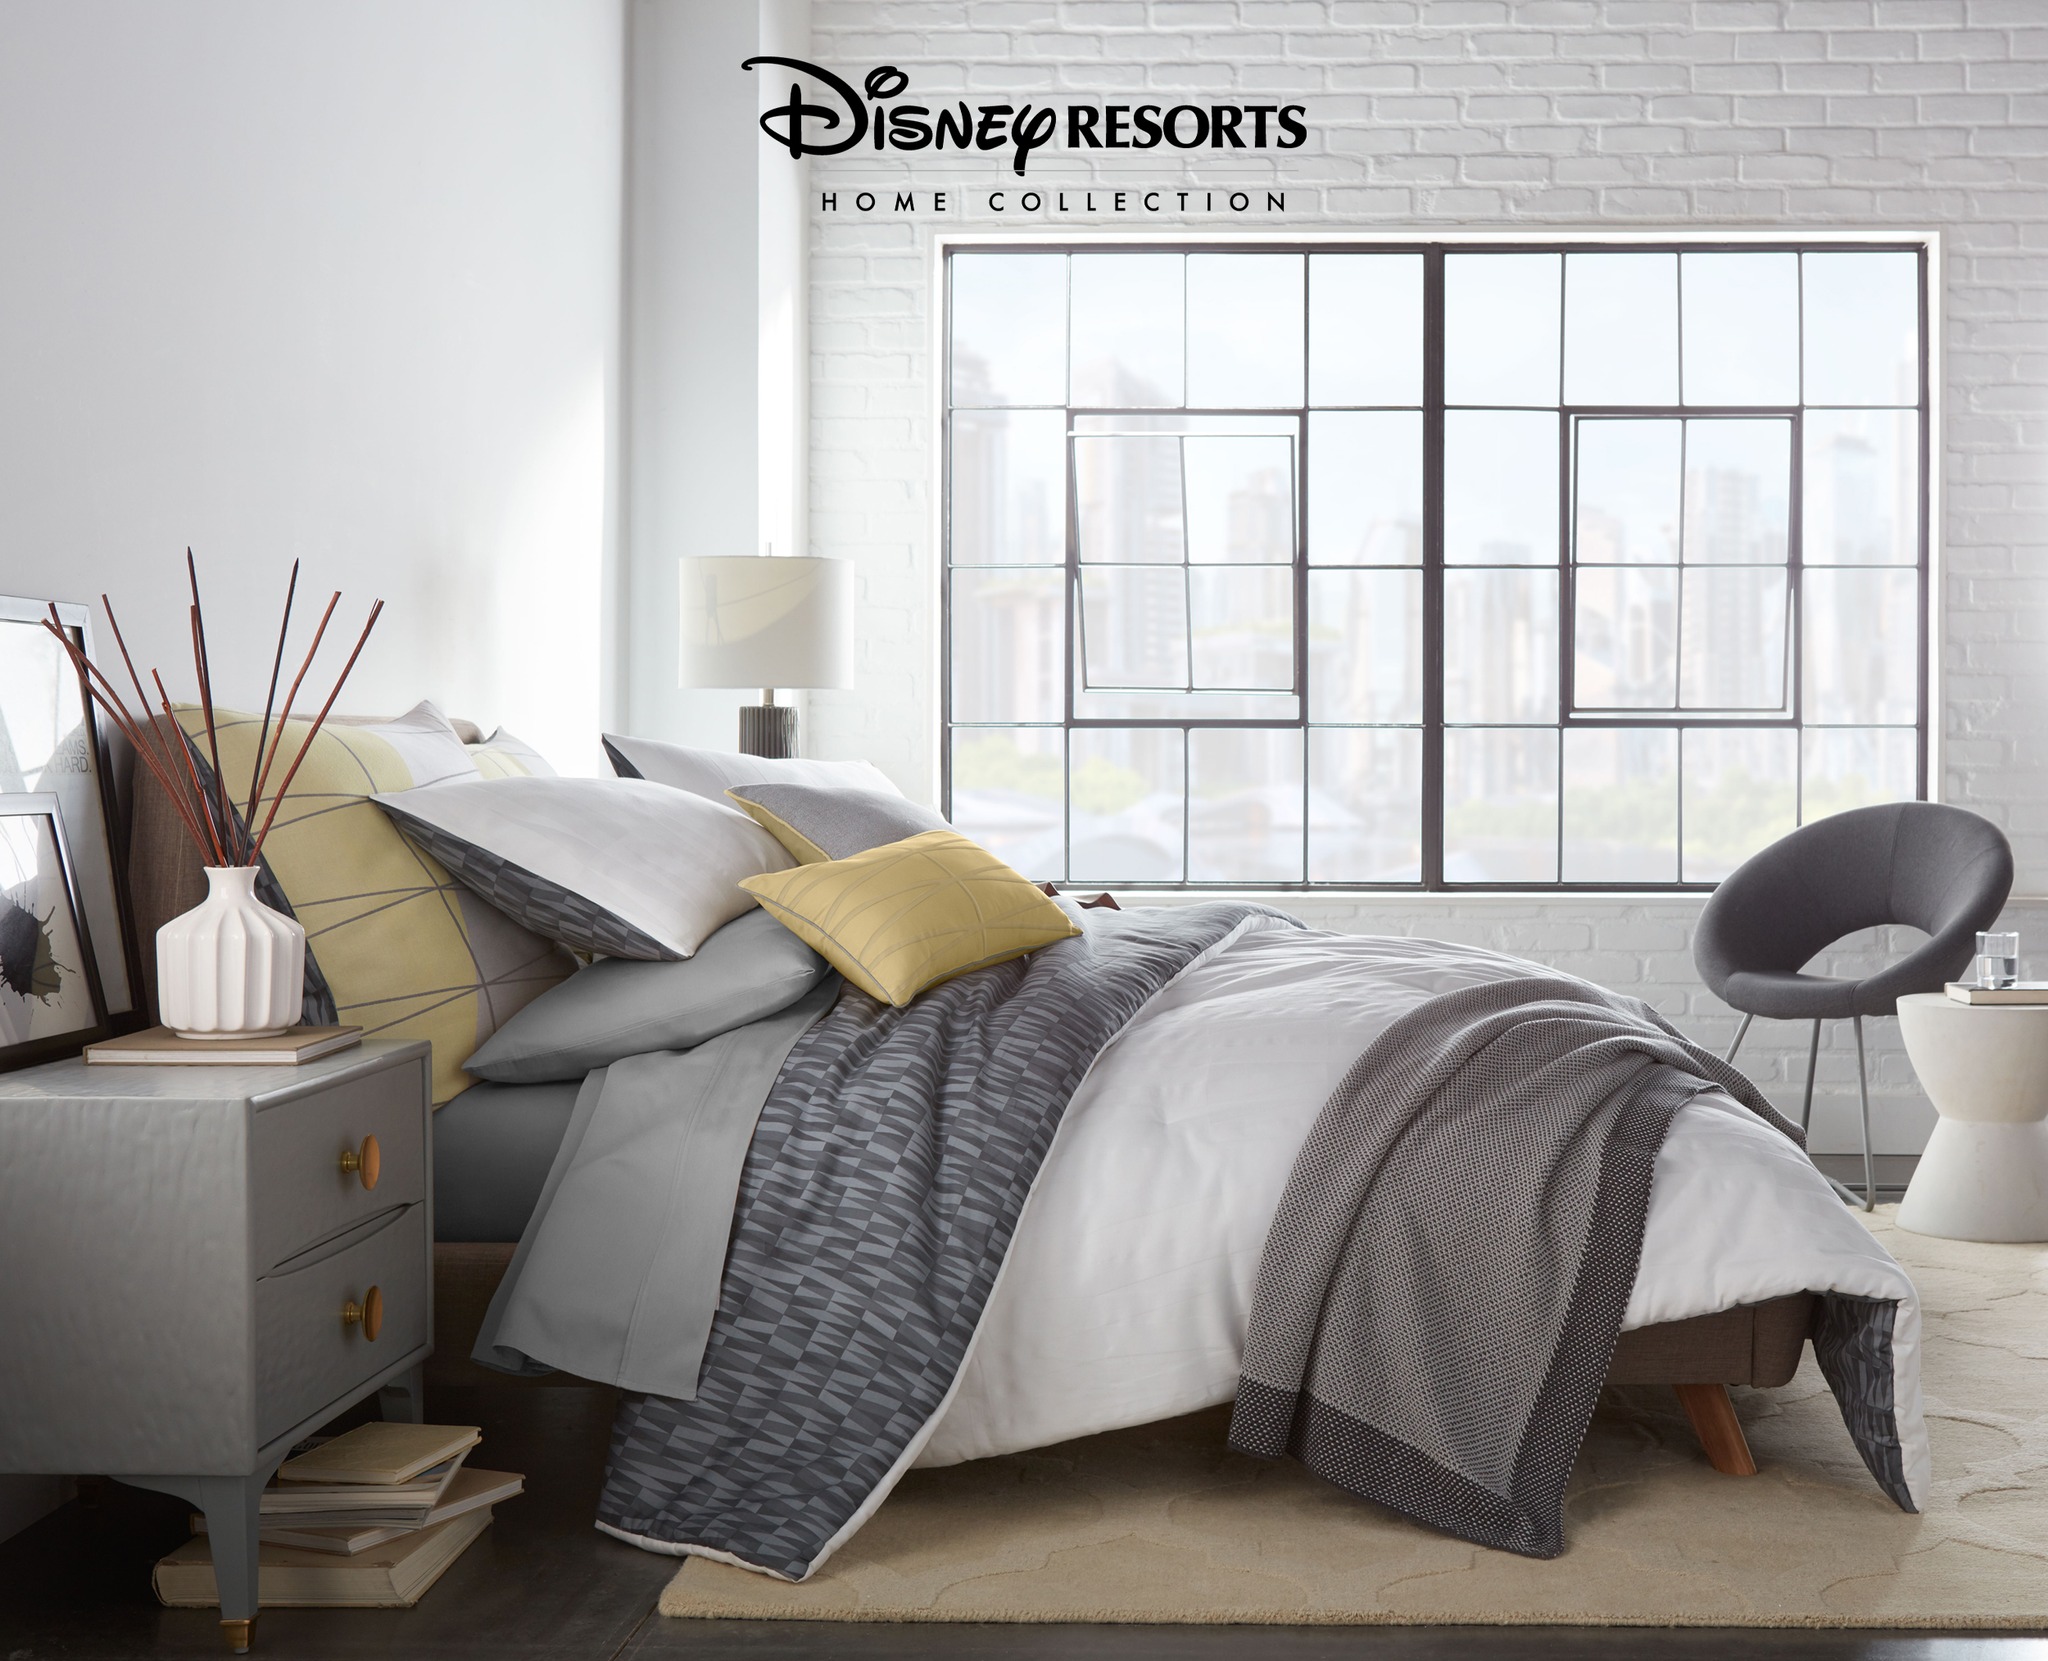 Disney Resorts Home Collection Bedding